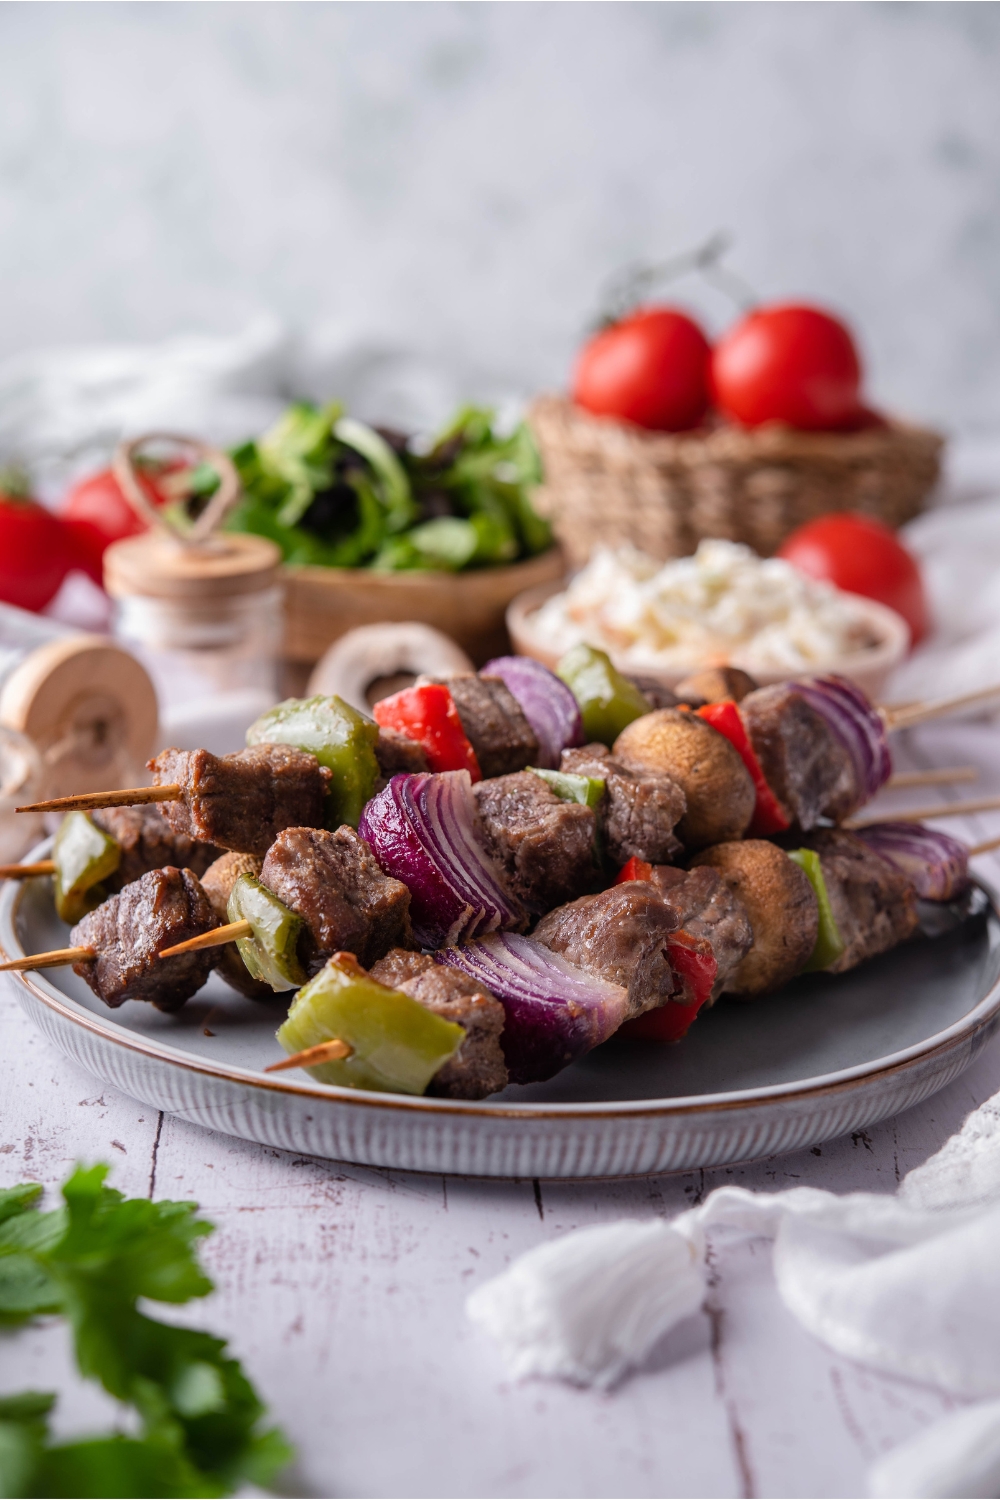 A stack of five baked steak kebabs filled with seasoned steak, bell peppers, mushrooms, and red onions. In the background are bowls of coleslaw, salad, tomatoes, and spices.